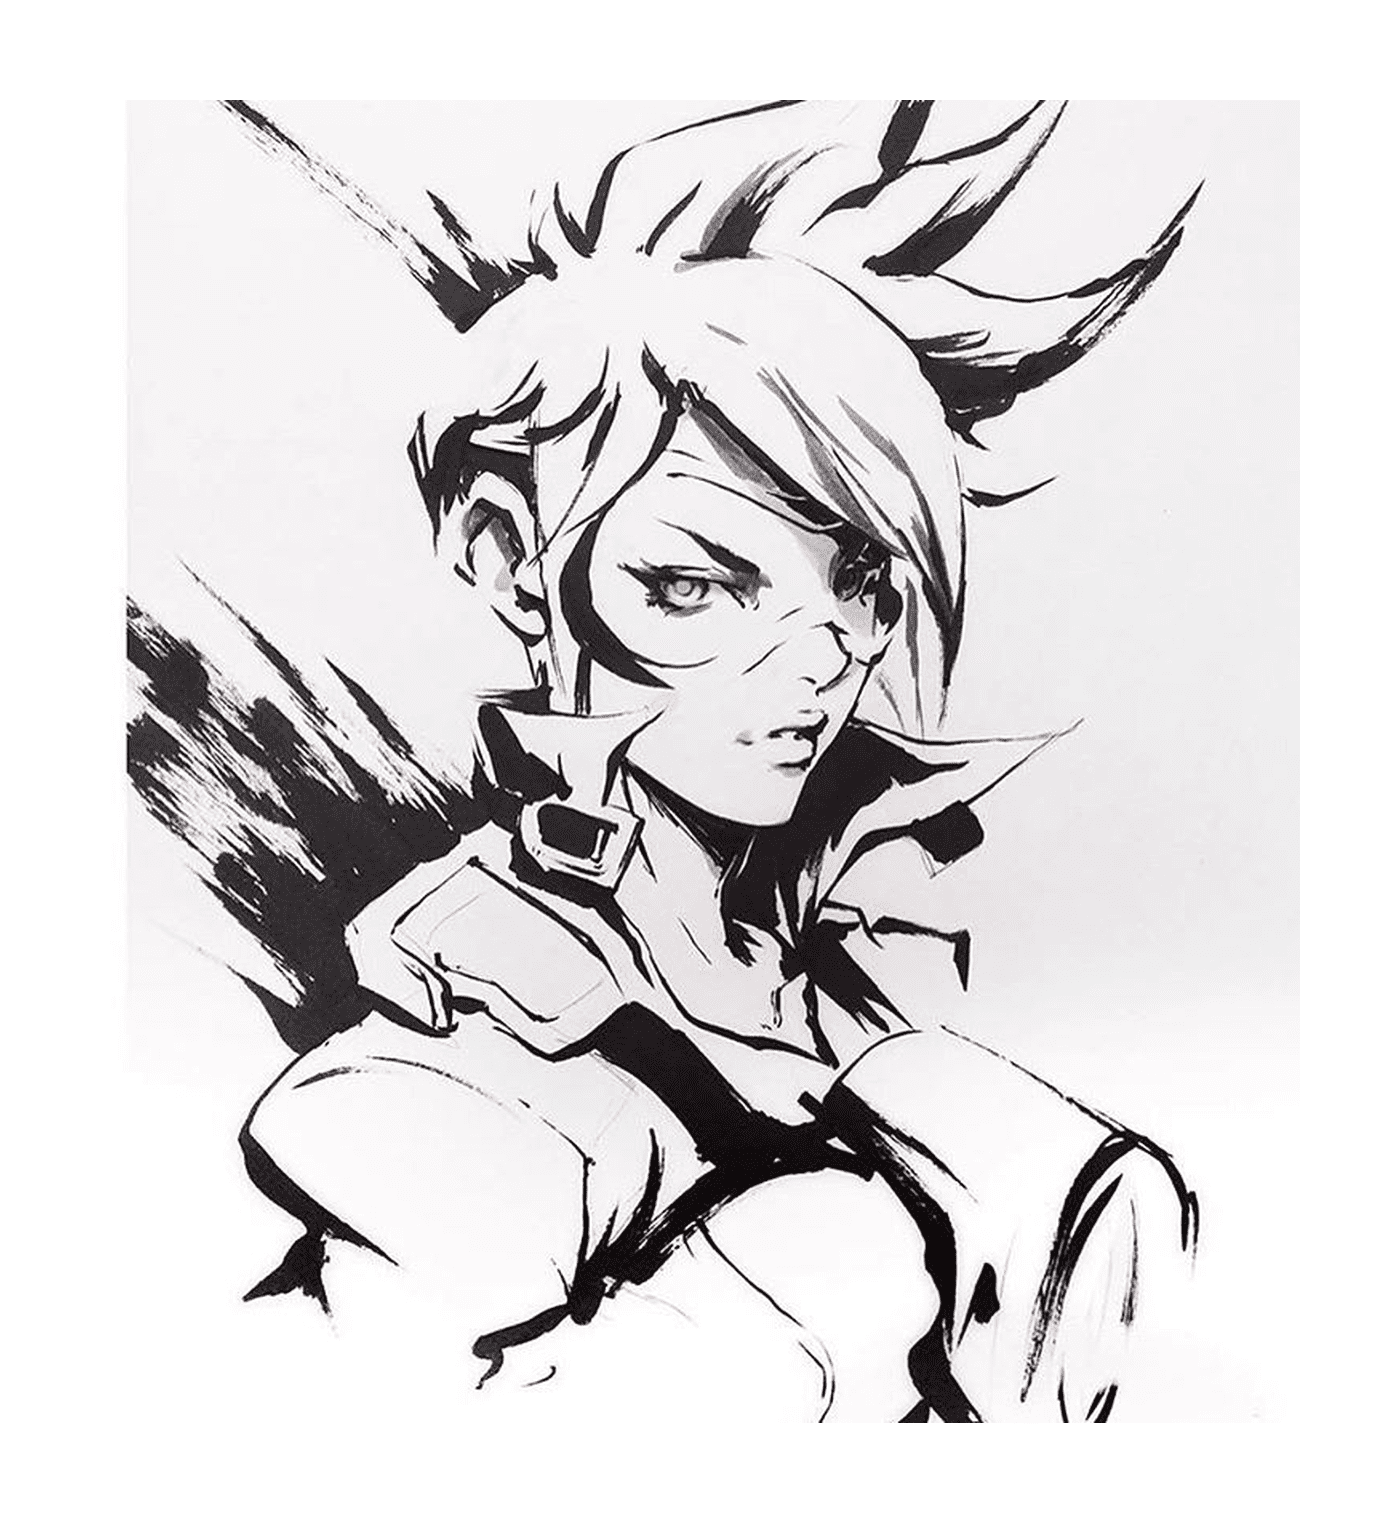  Tracer, drawing art 